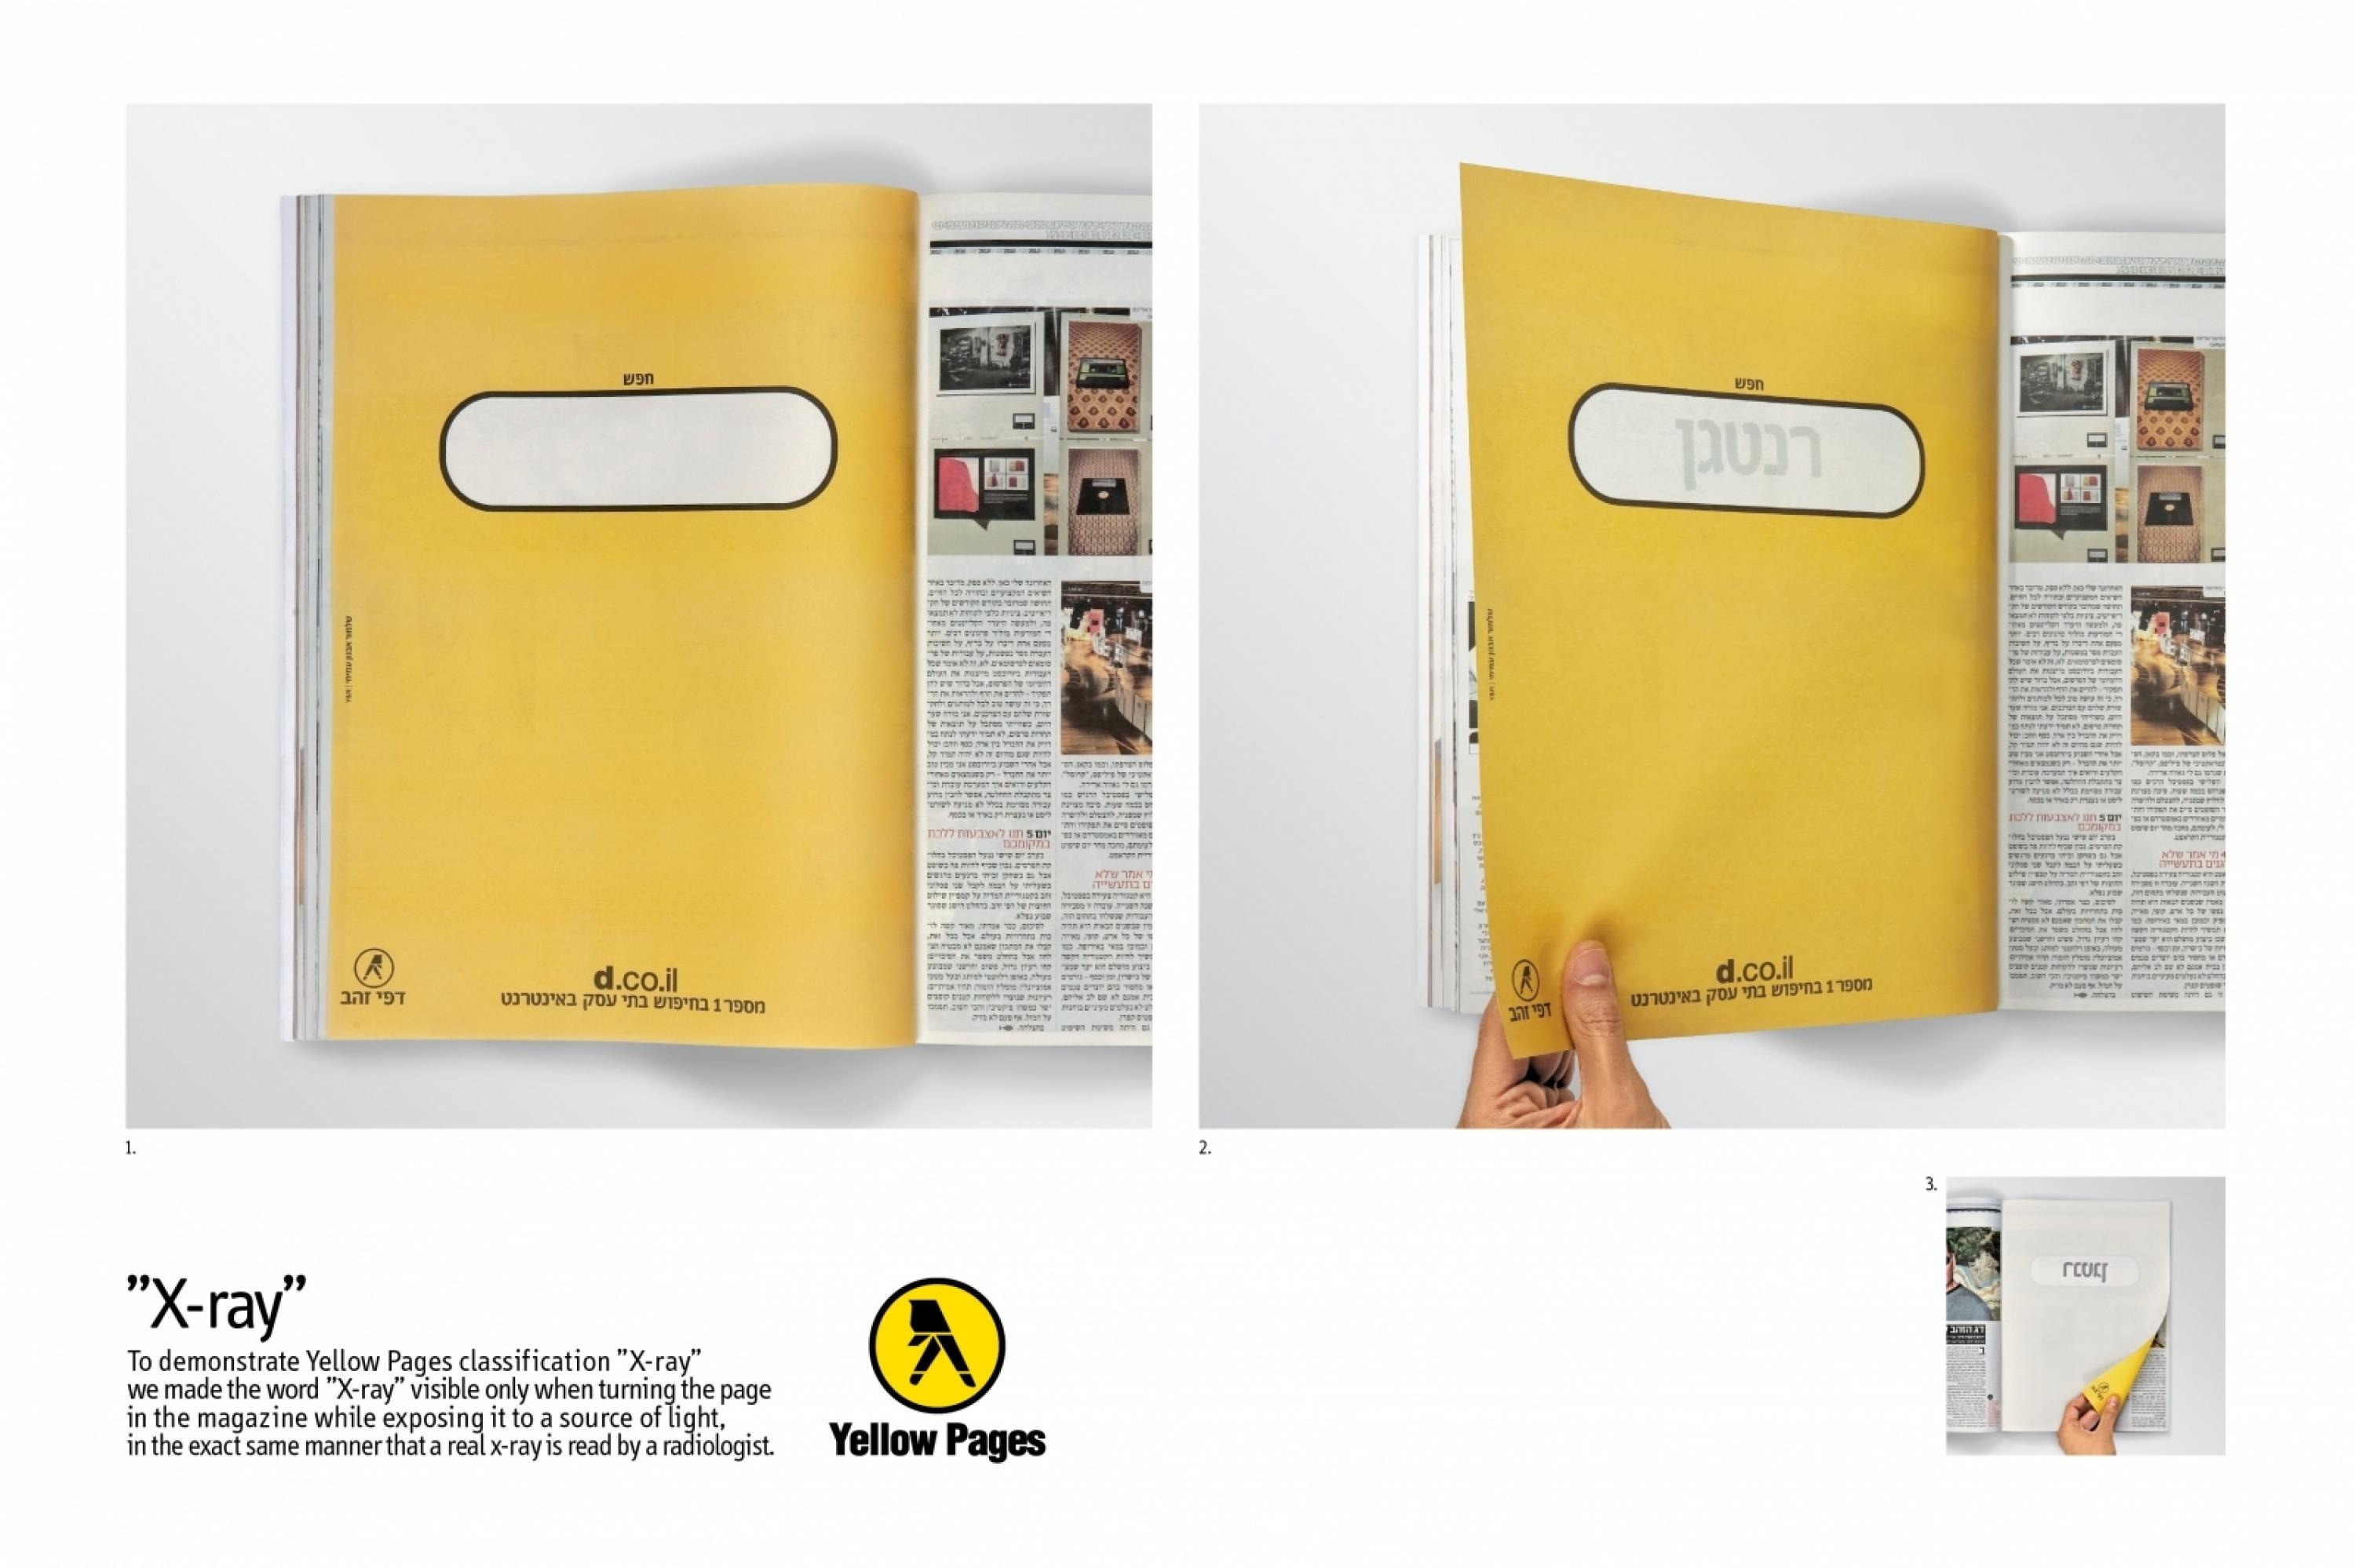 YELLOW PAGES WEBSITE